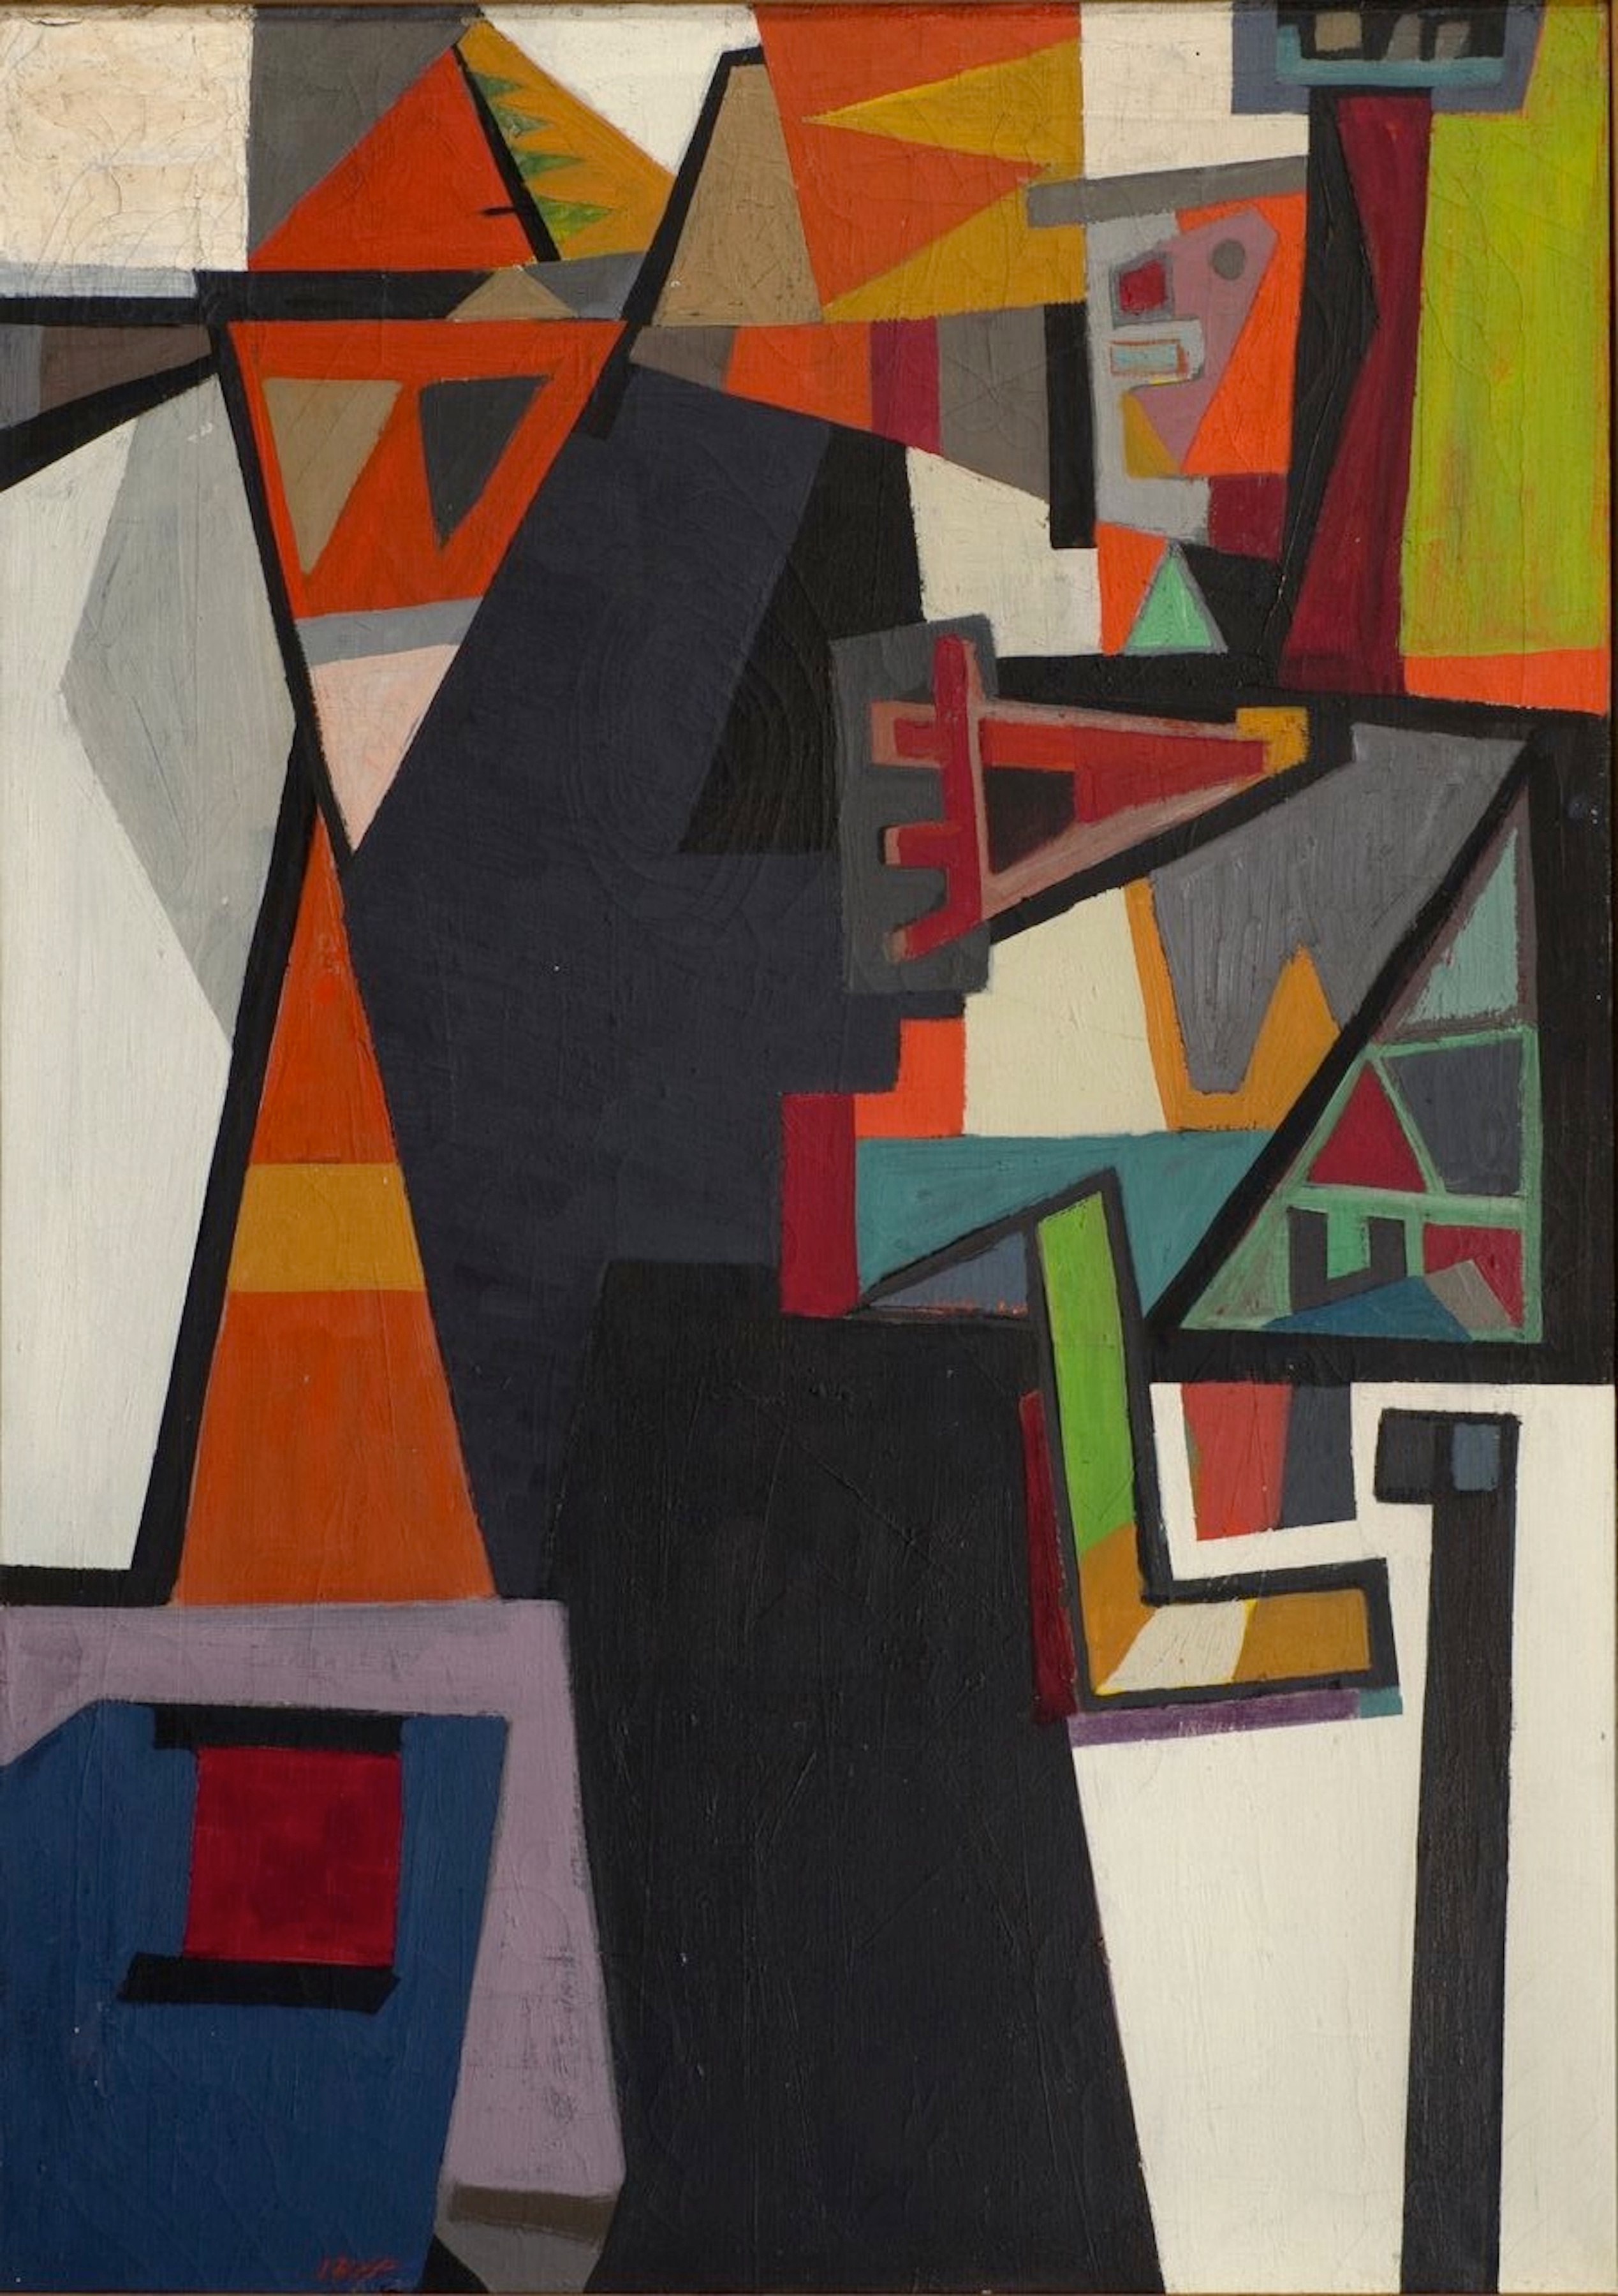 Painting of geometric shapes separated by black lines in a variety of oranges, greens, blues, greys, and whites. On the top left there is a shape resembling the side profile of a human face with a triangular hand painted in red, a large box body, and an L shaped leg pointing to the right.